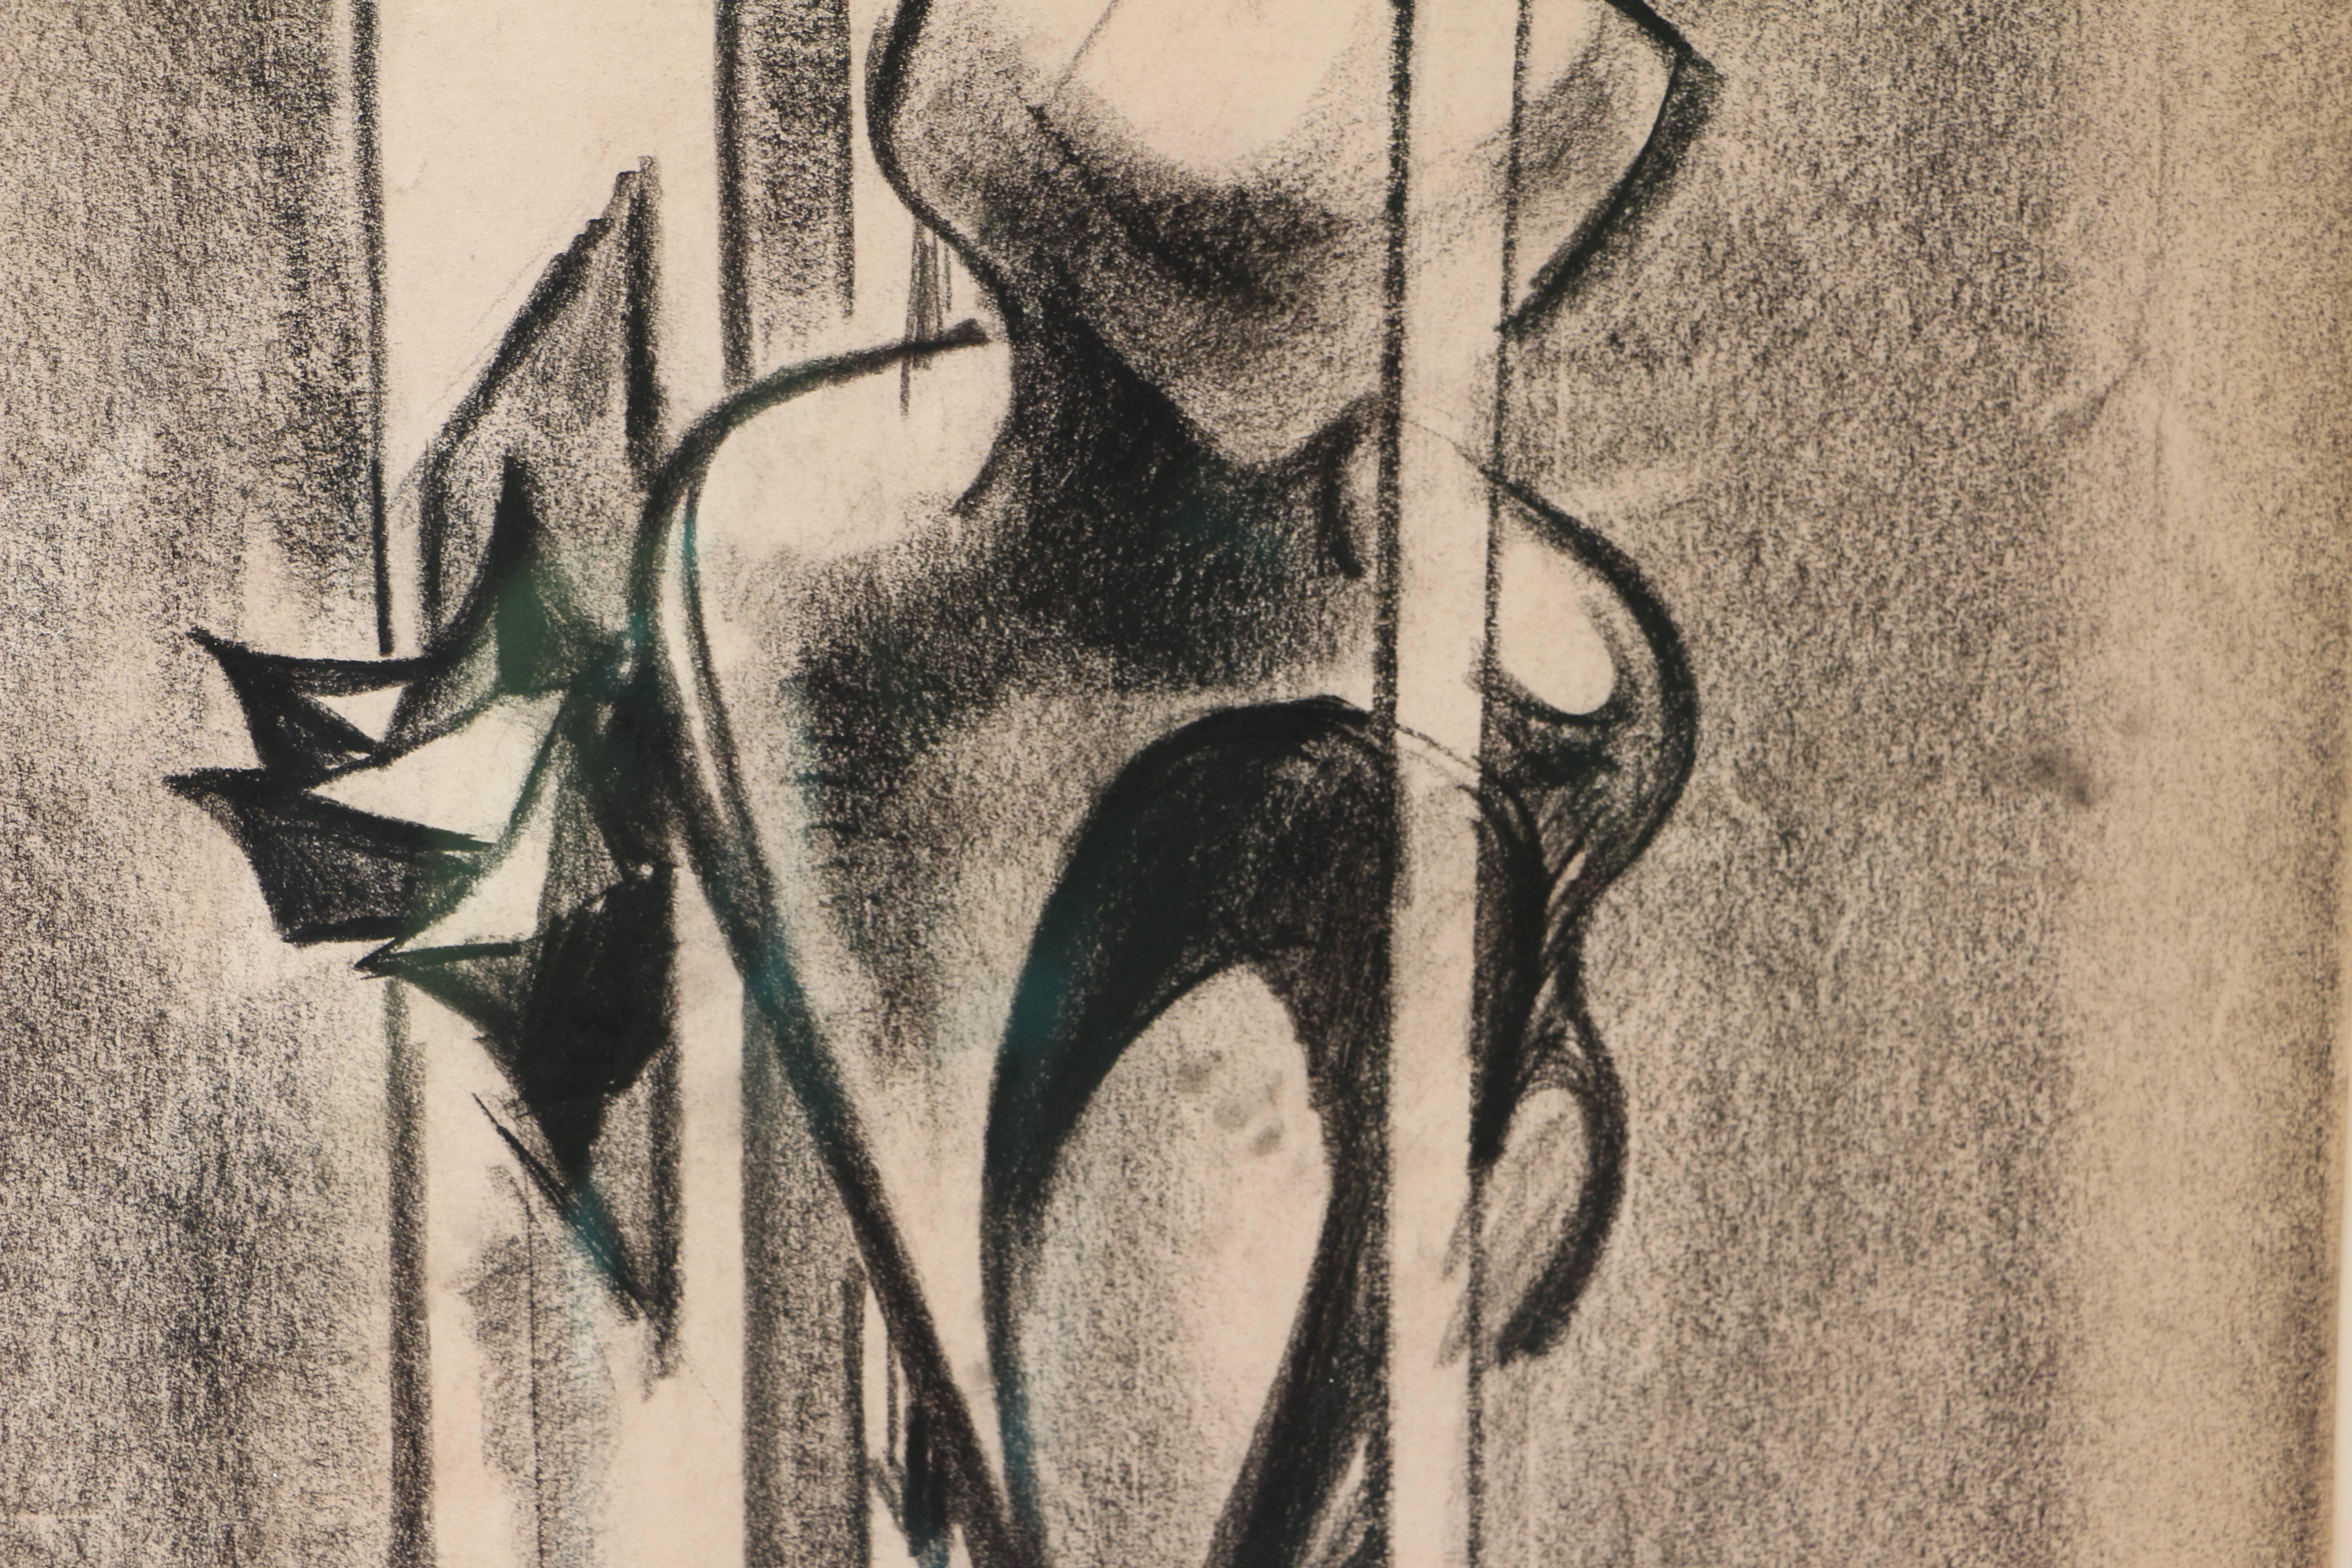 Untitled, original work on paper with dark forms and shapes  - Beige Abstract Drawing by Lorser Feitelson